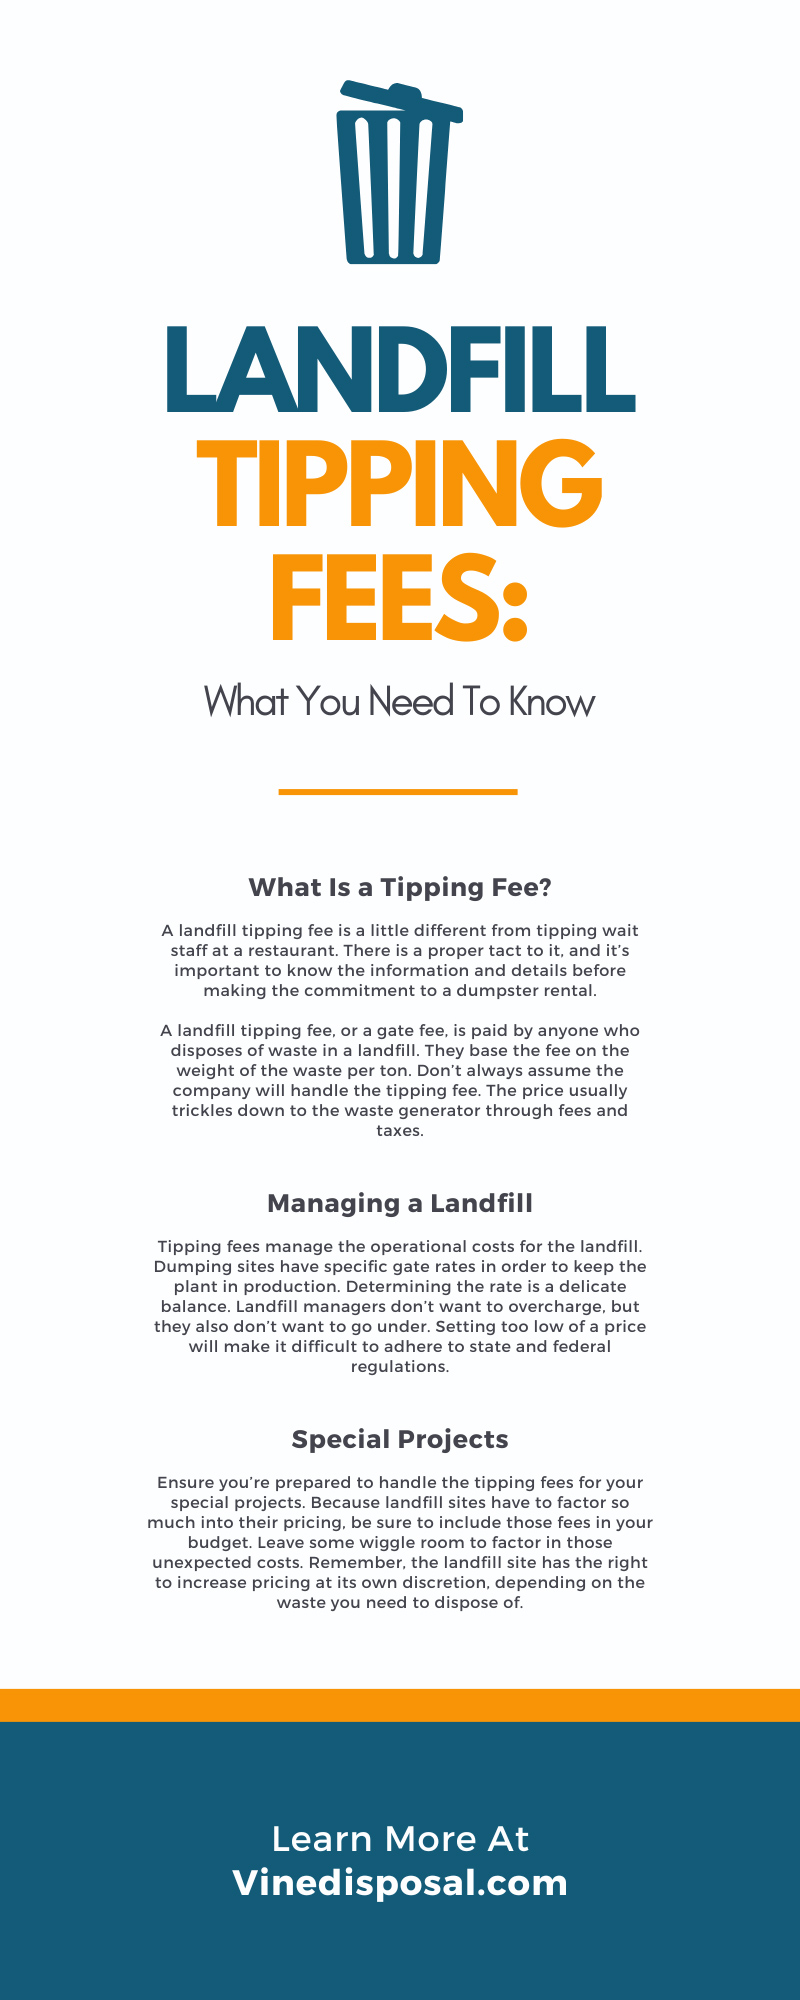 Landfill Tipping Fees: What You Need To Know